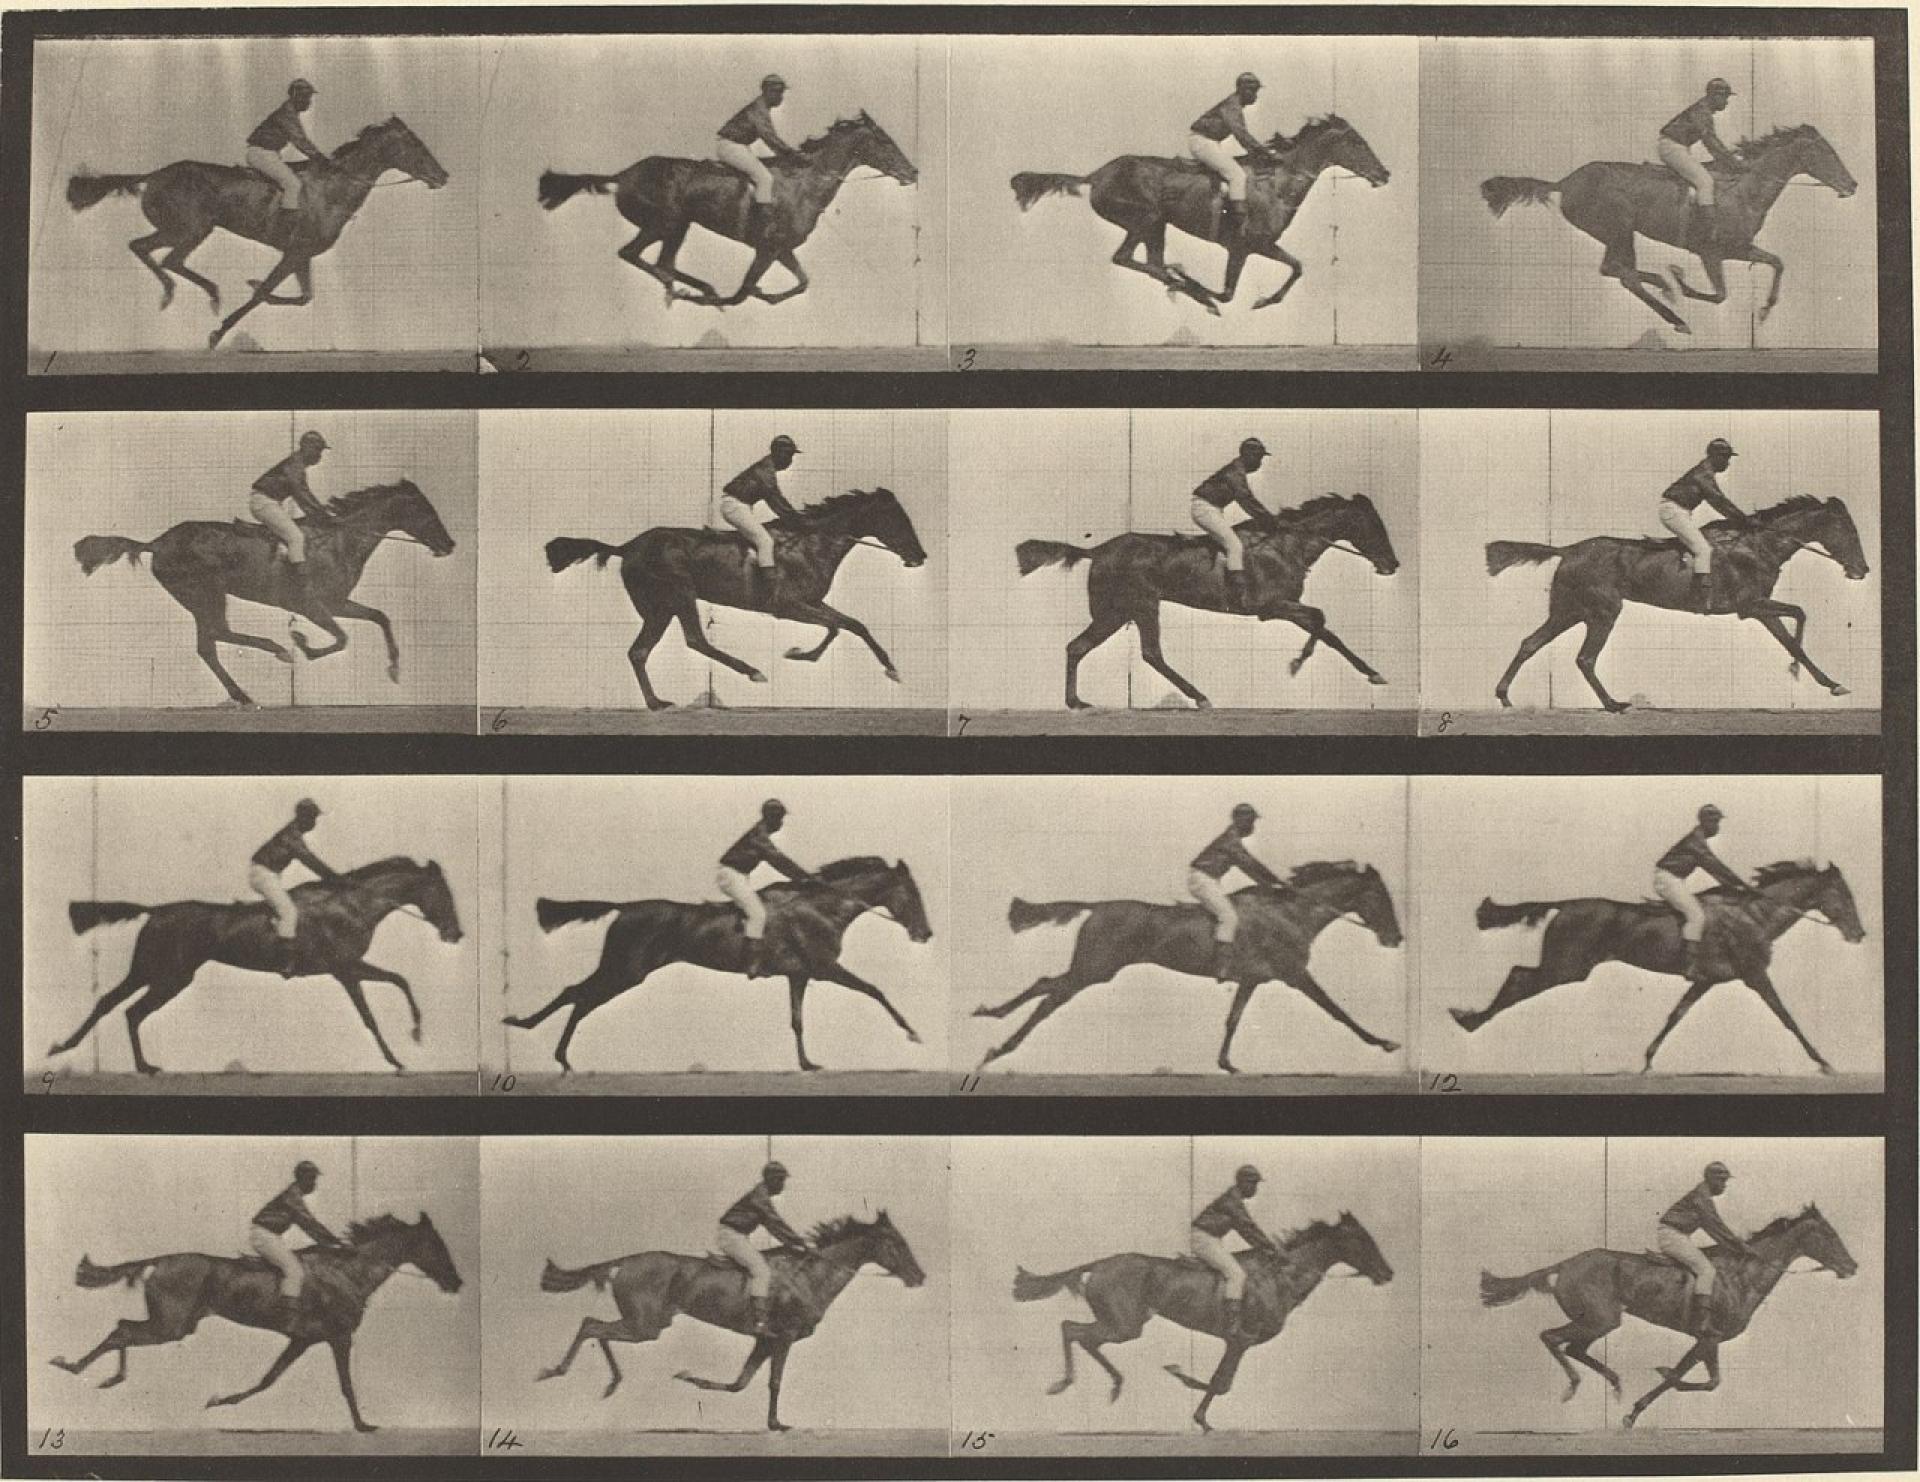 The Horse in Motion by Eadweard Muybridge show a sequential series of six to twelve "automatic electro-photographs" depicting the movement of a horse (1878).